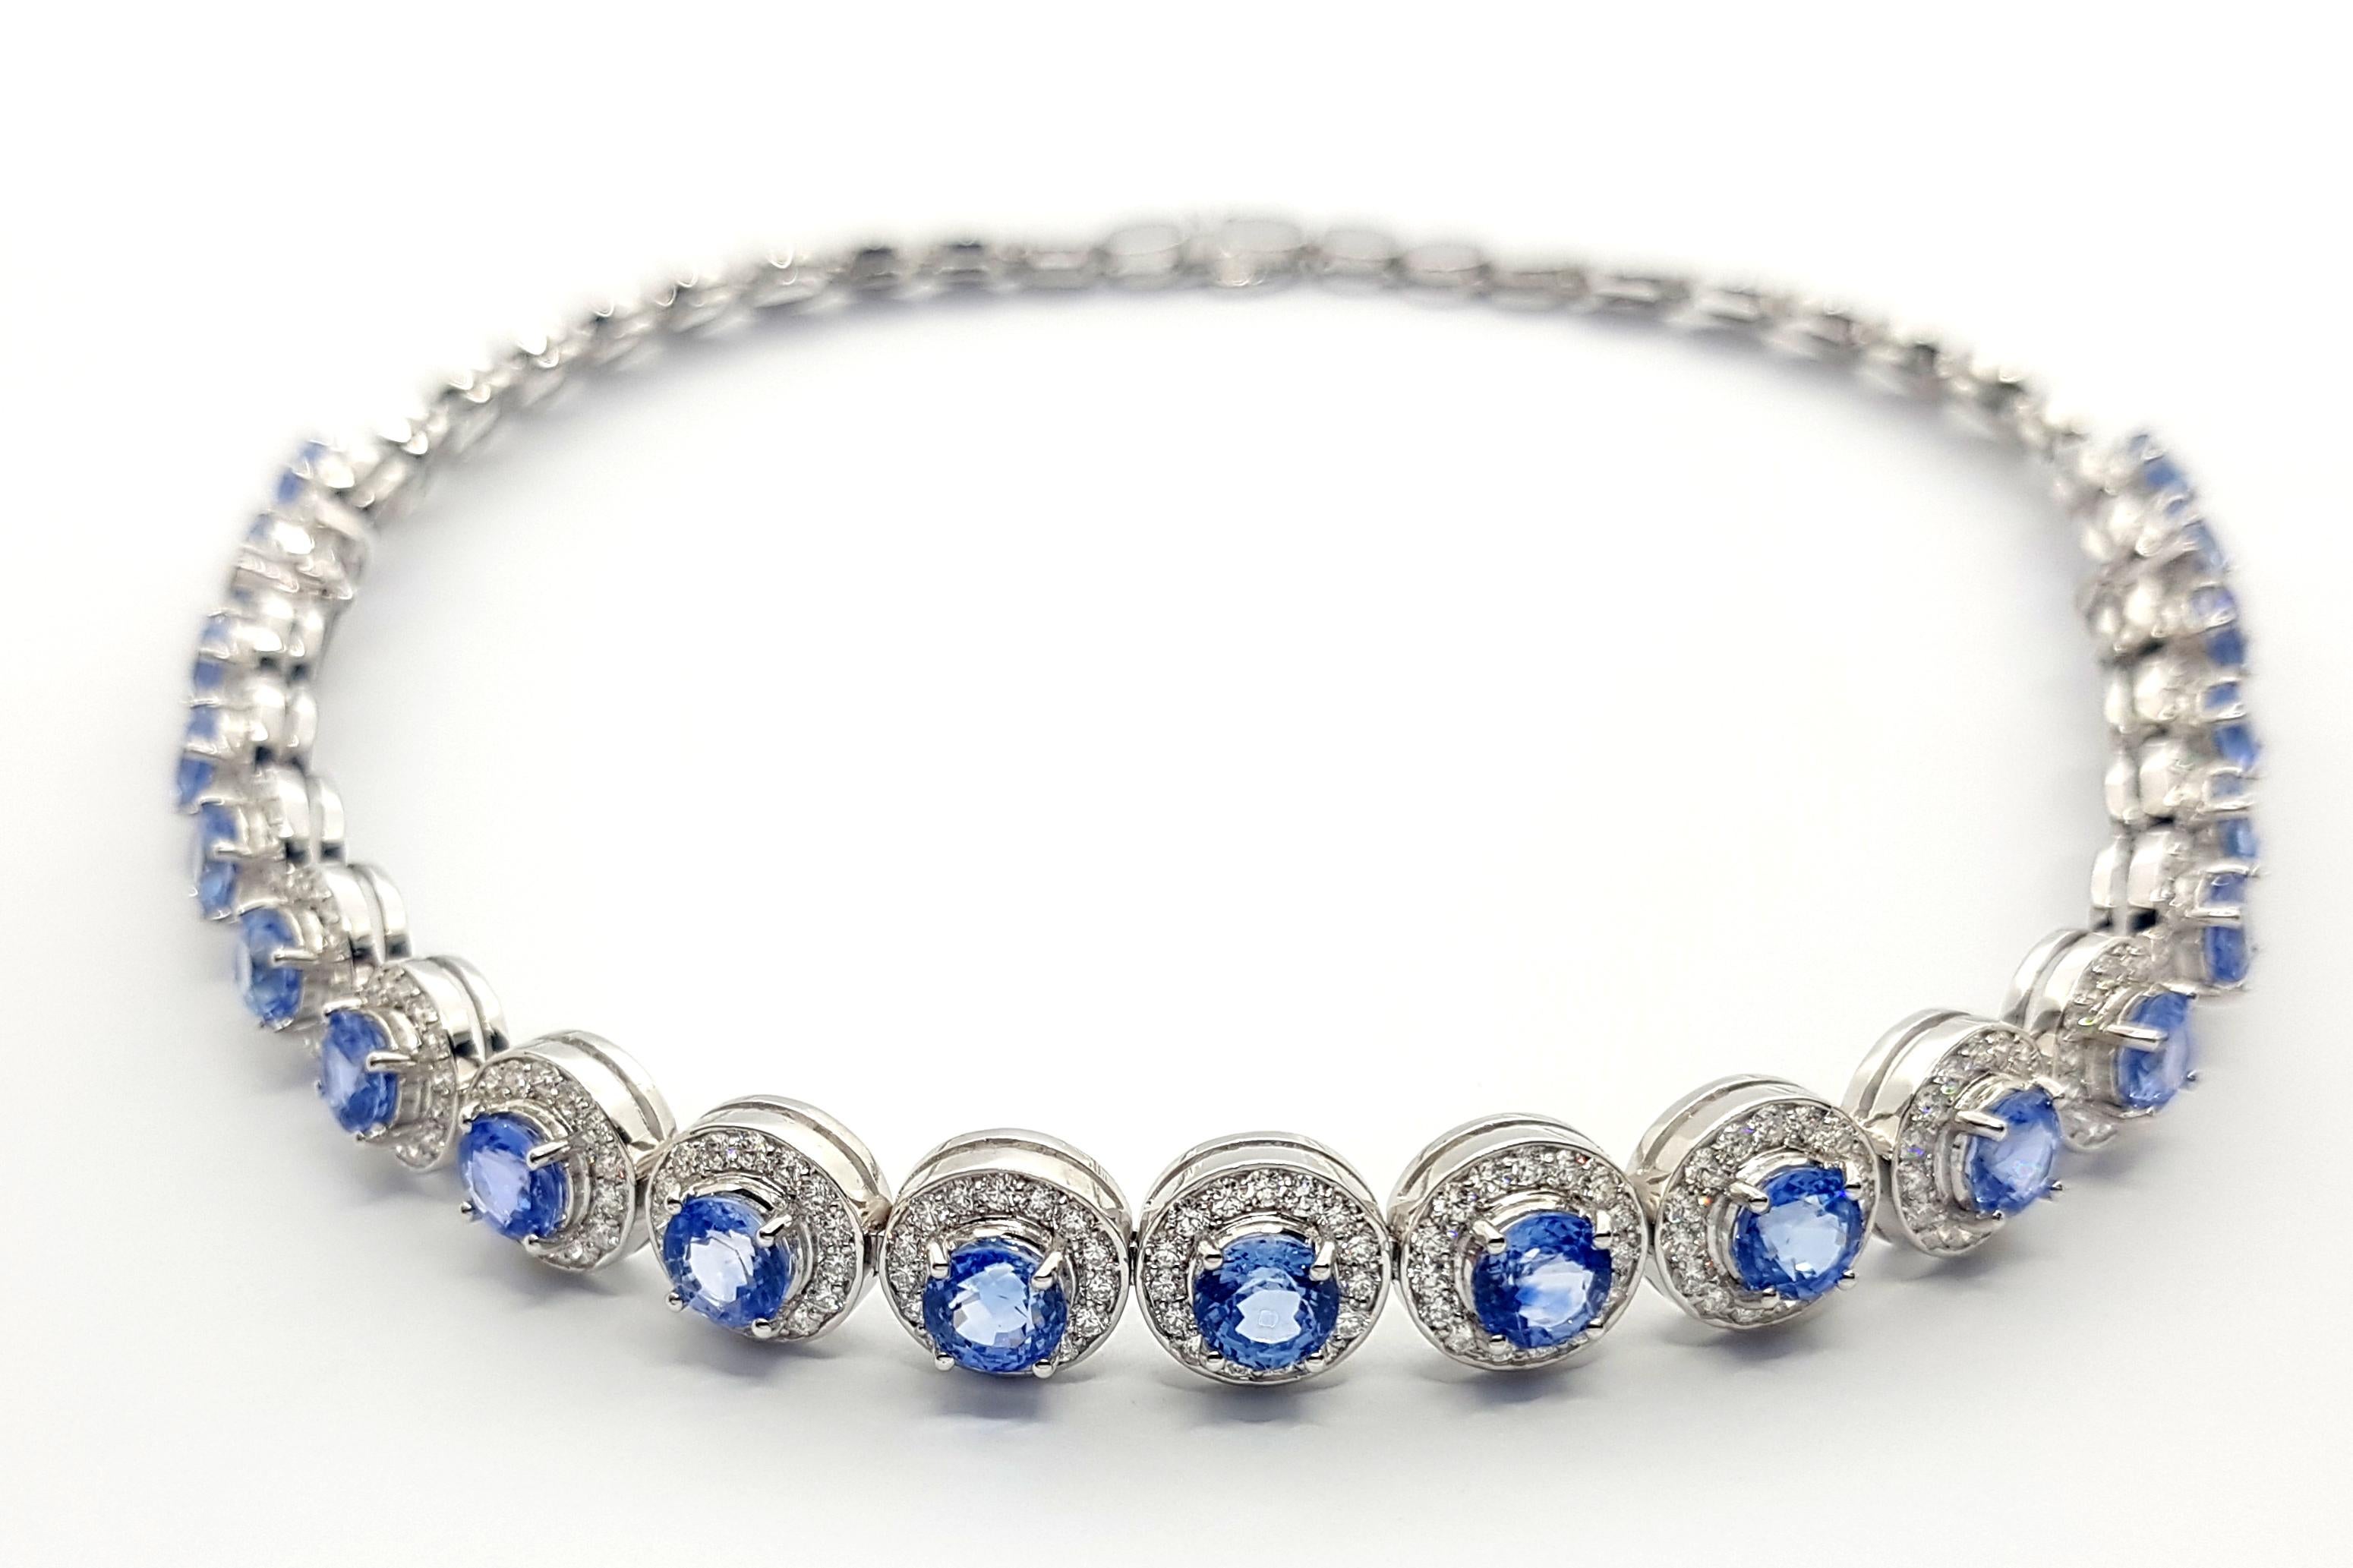 Blue Sapphire 23.35 carats with Diamond 6.03 carats Necklace set in 18K White Gold Settings

Width:  1.0 cm 
Length: 37.5 cm
Total Weight: 69.72 grams

Blue Sapphire 19.31 carats with Diamond 5.02 carats Bracelet set in 18K White Gold